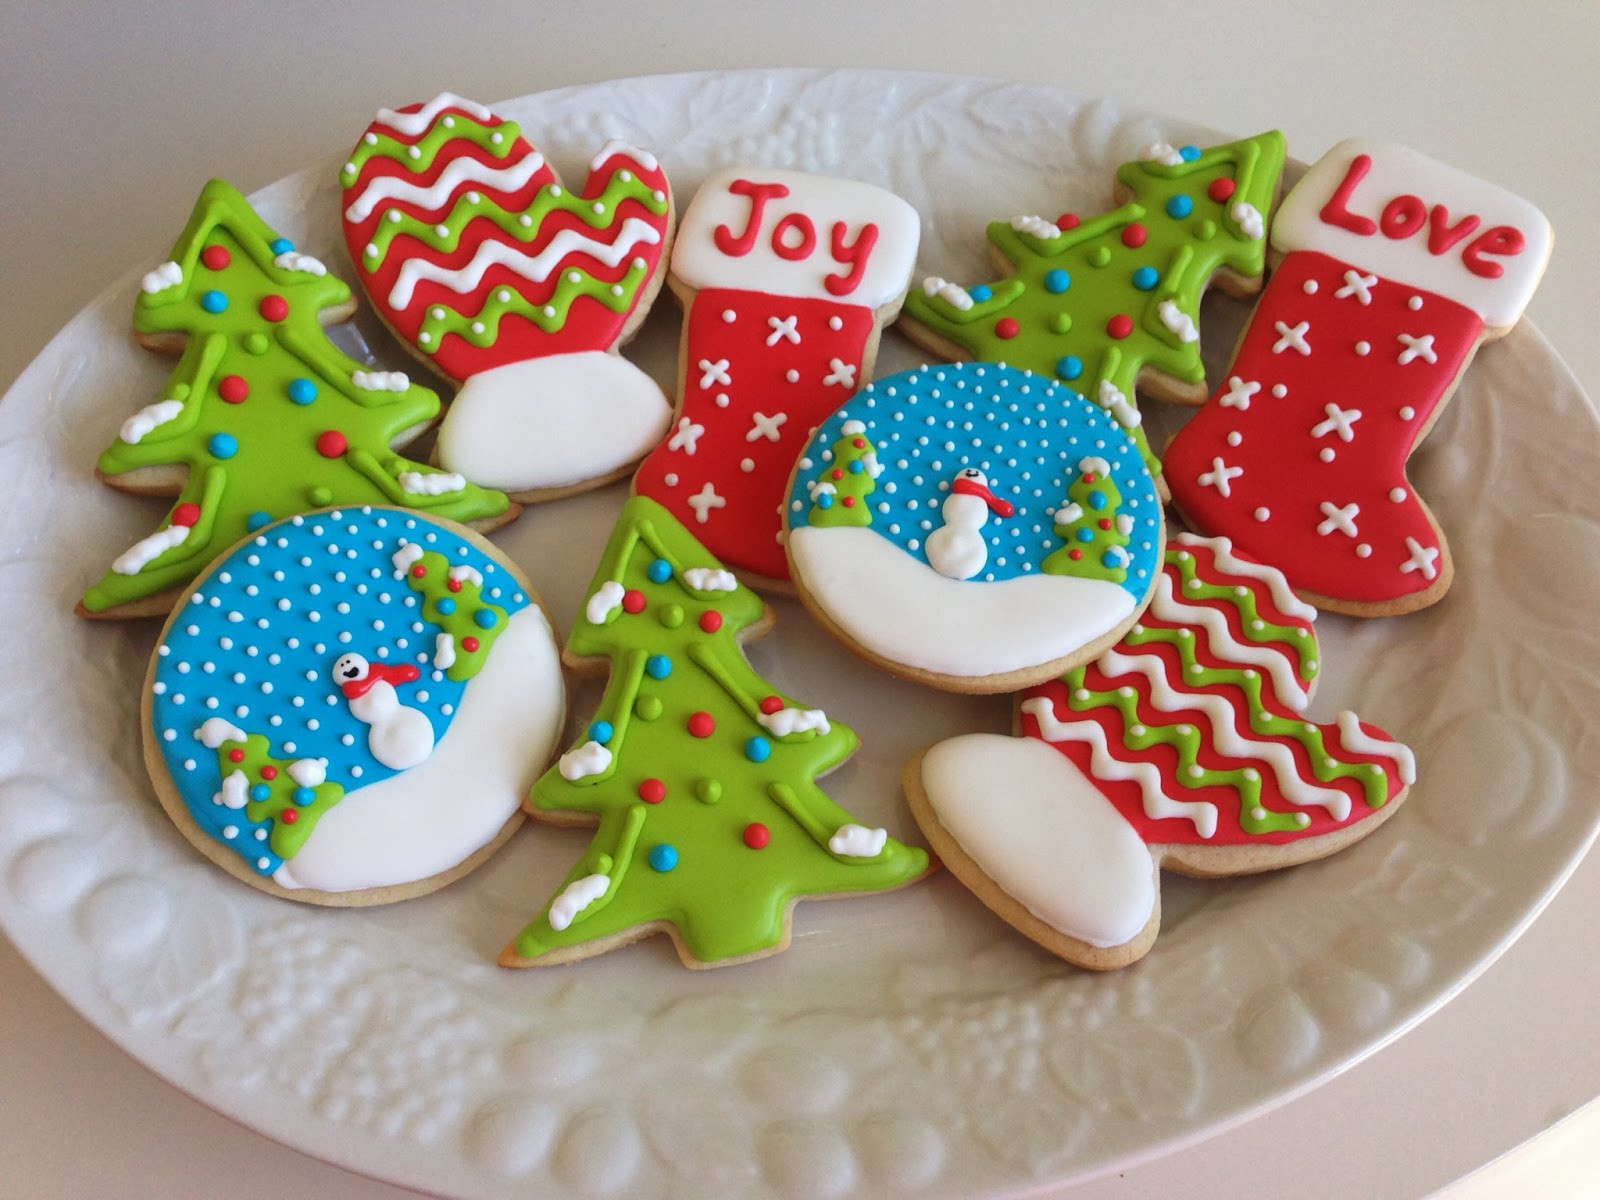 Royal Icing Christmas Cookie
 monograms & cake Christmas Cut Out Sugar Cookies with